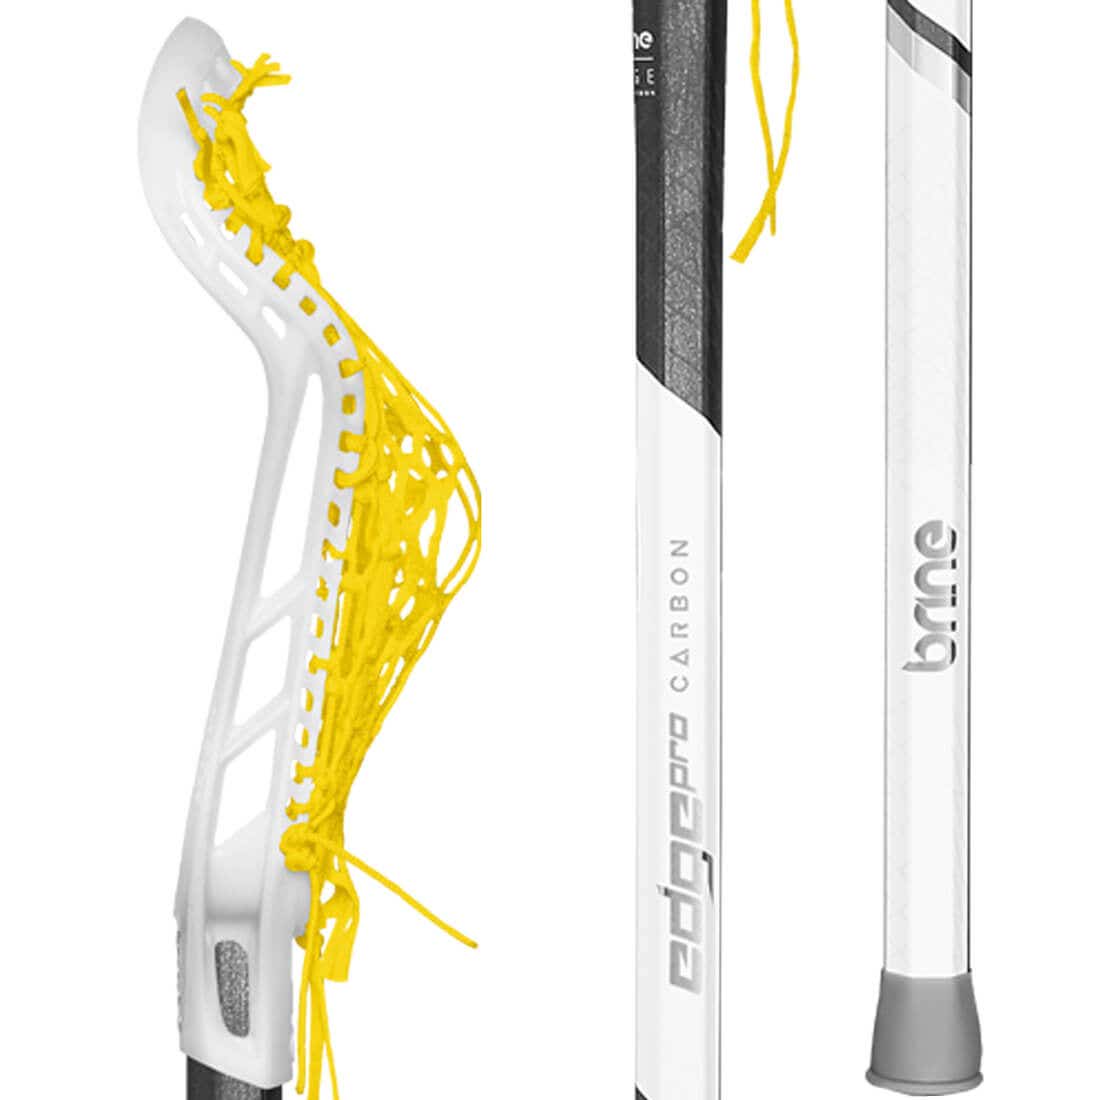 https://www.lacrosseunlimited.com/media/catalog/product/e/d/edge-pro-3.jpg?optimize=high&fit=bounds&height=1120&width=1120